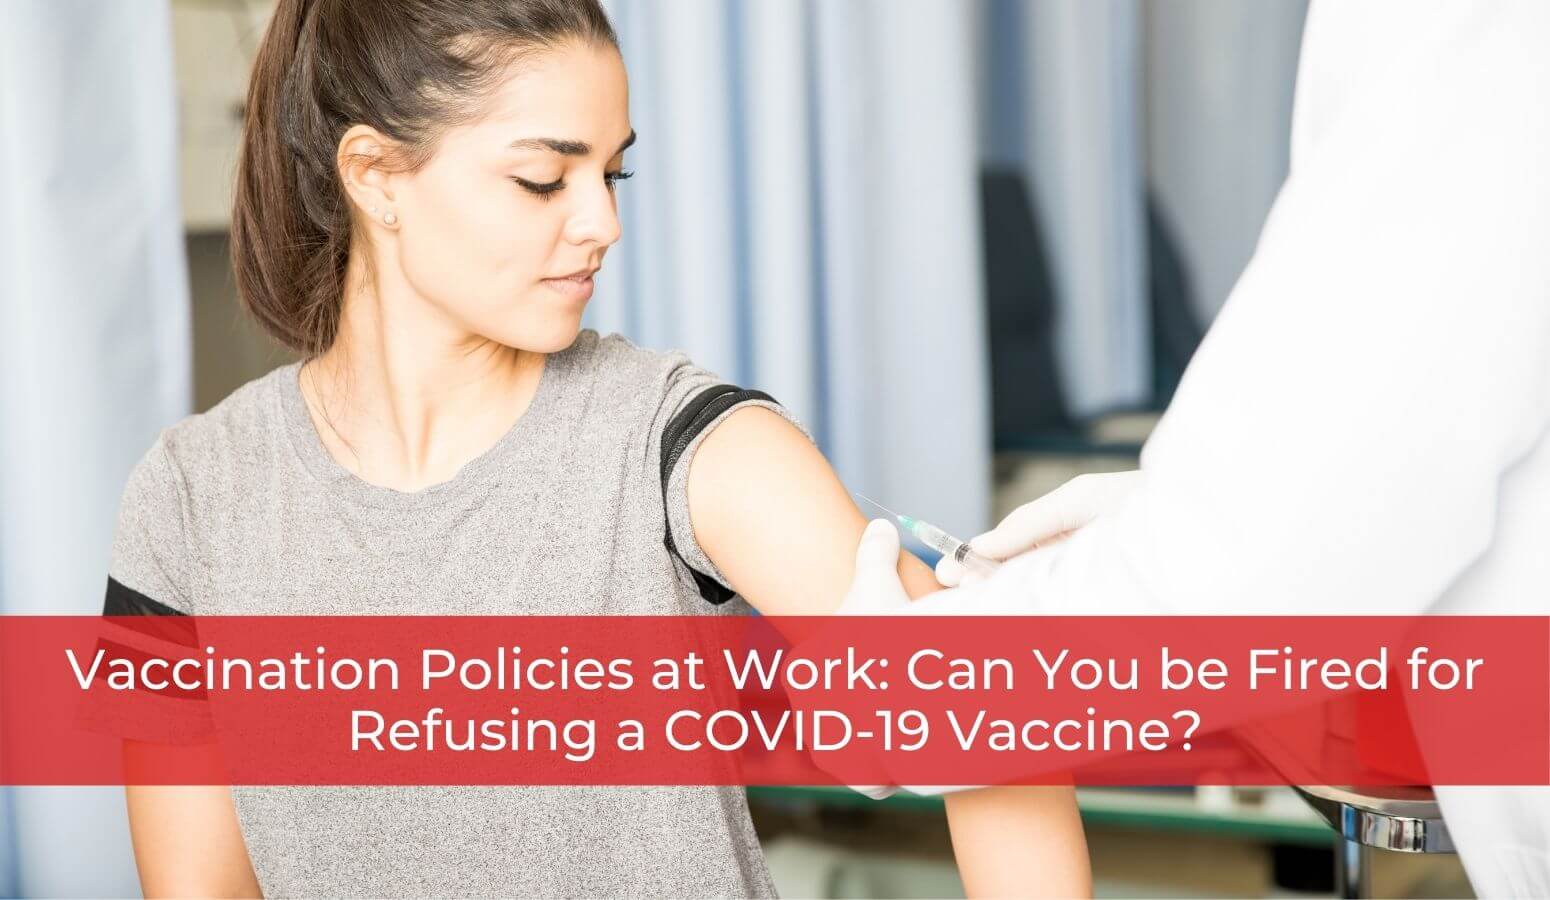 Featured image for “Vaccination Policies at Work: Can You be Fired for Refusing a COVID-19 Vaccine?”